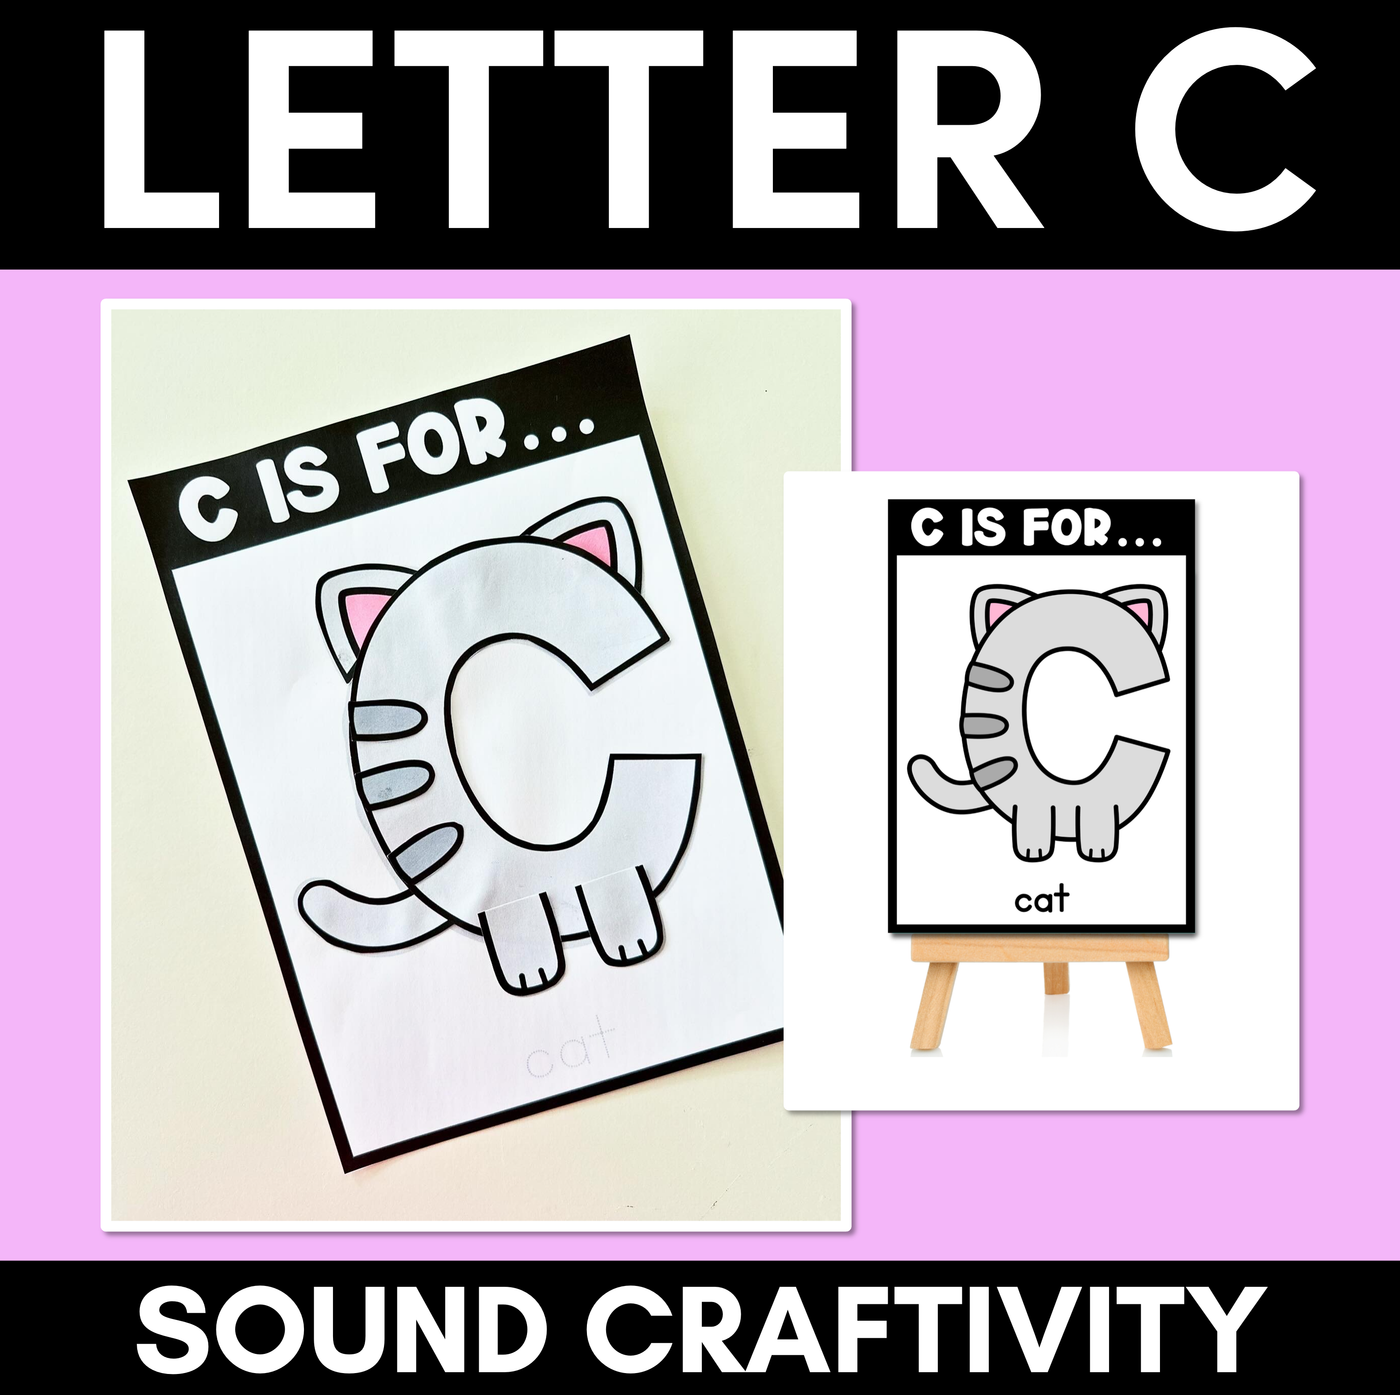 Beginning Sound Crafts - Letter B - C is for Cat